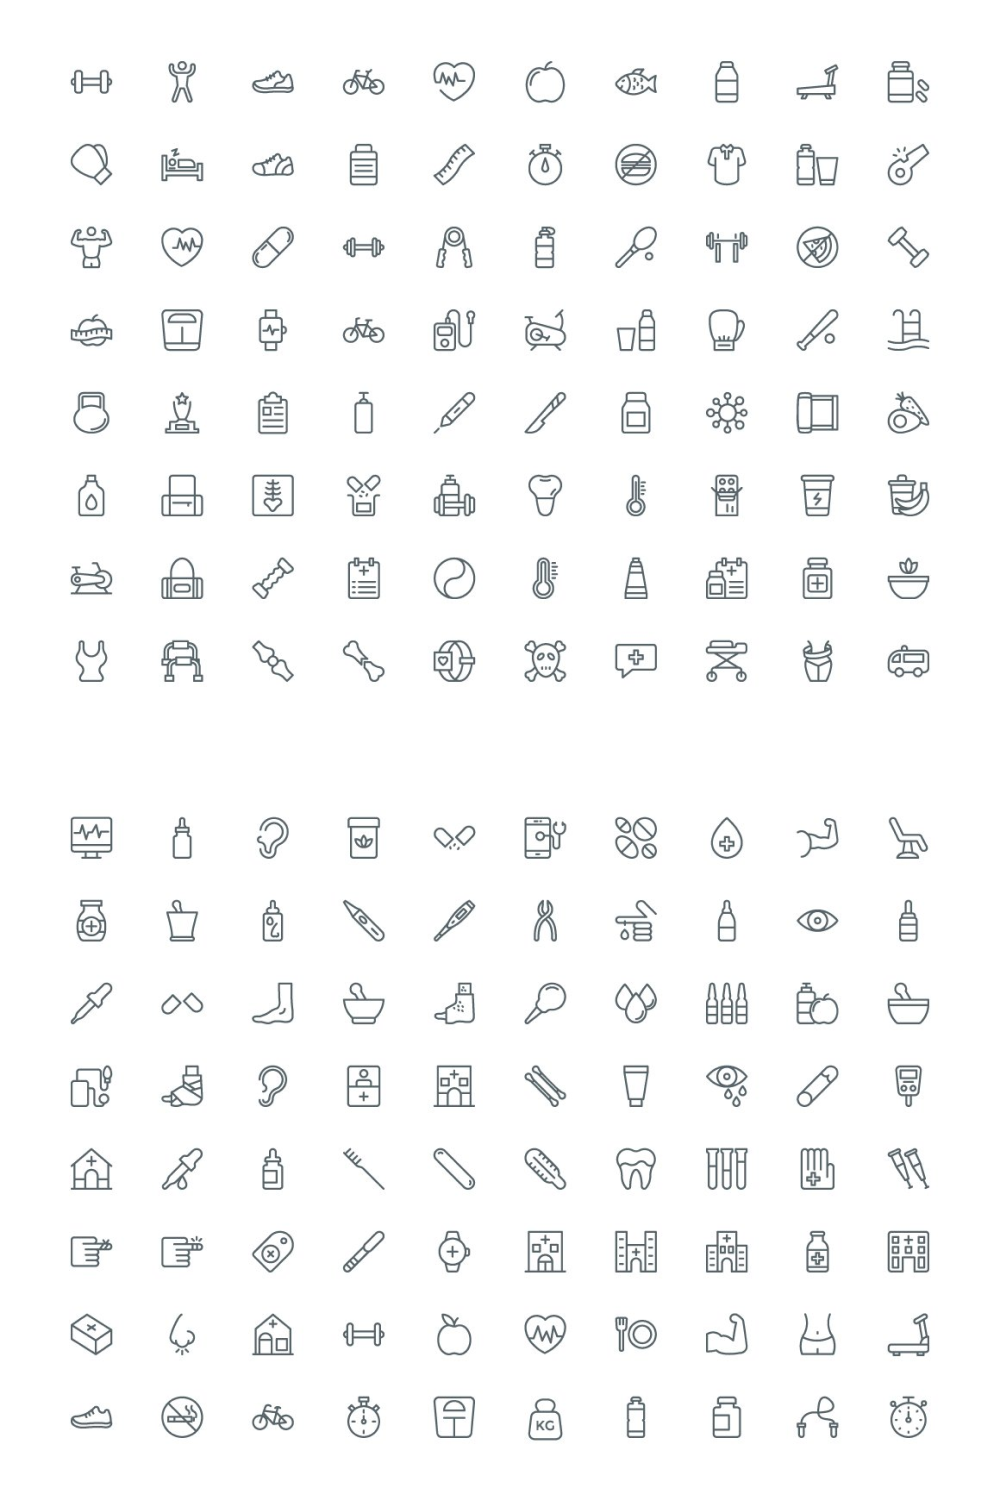 Icons for goods are unique.